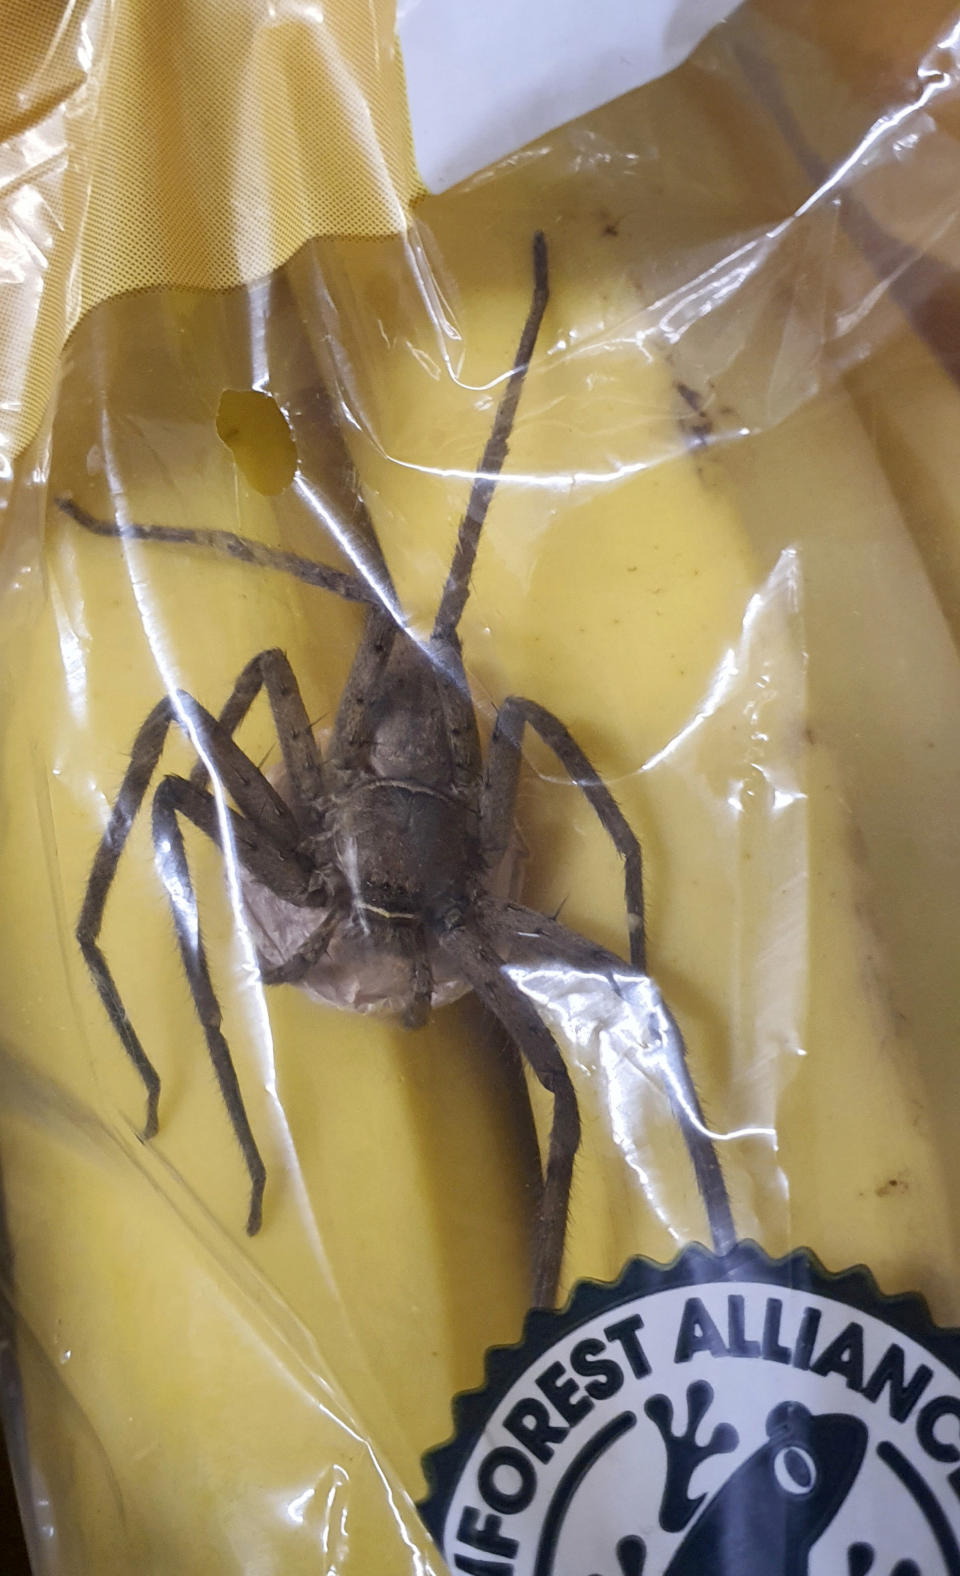 The spider was clutching an egg sack. (Caters)